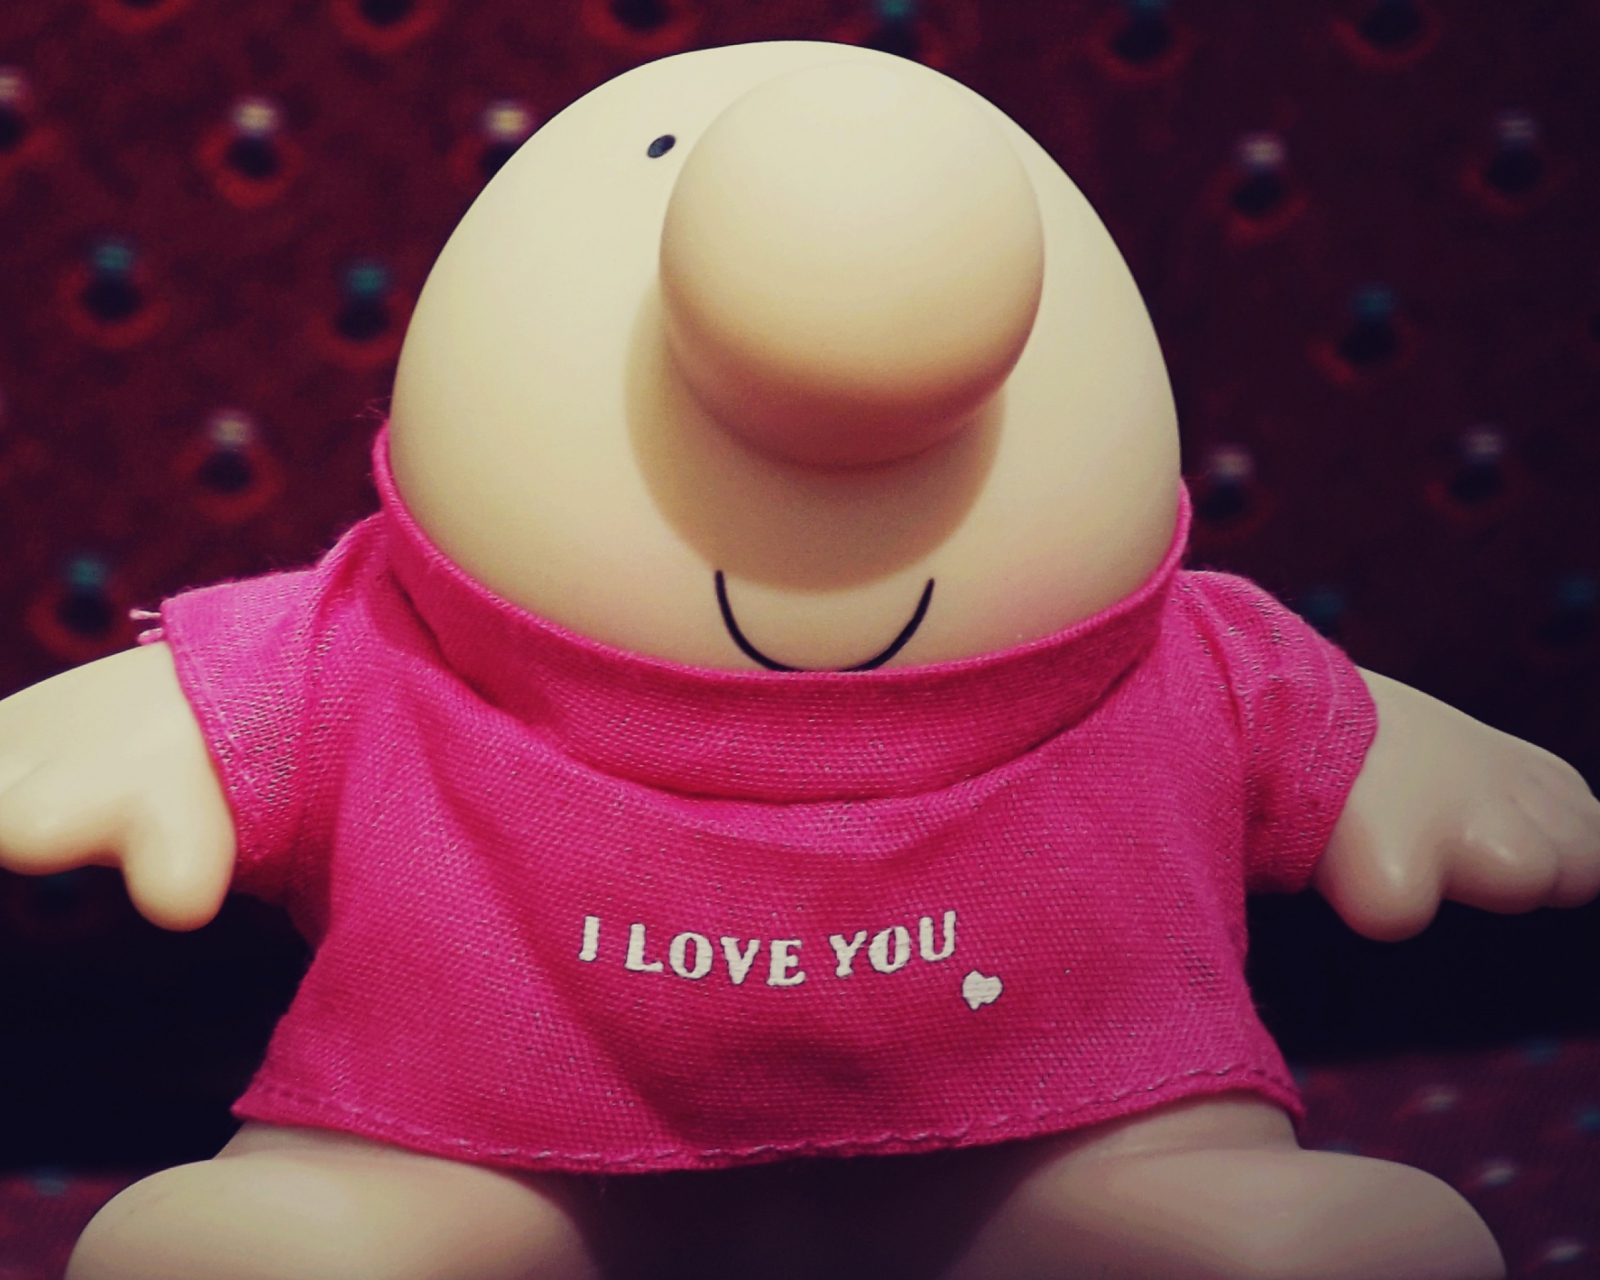 I Love You Toy wallpaper 1600x1280